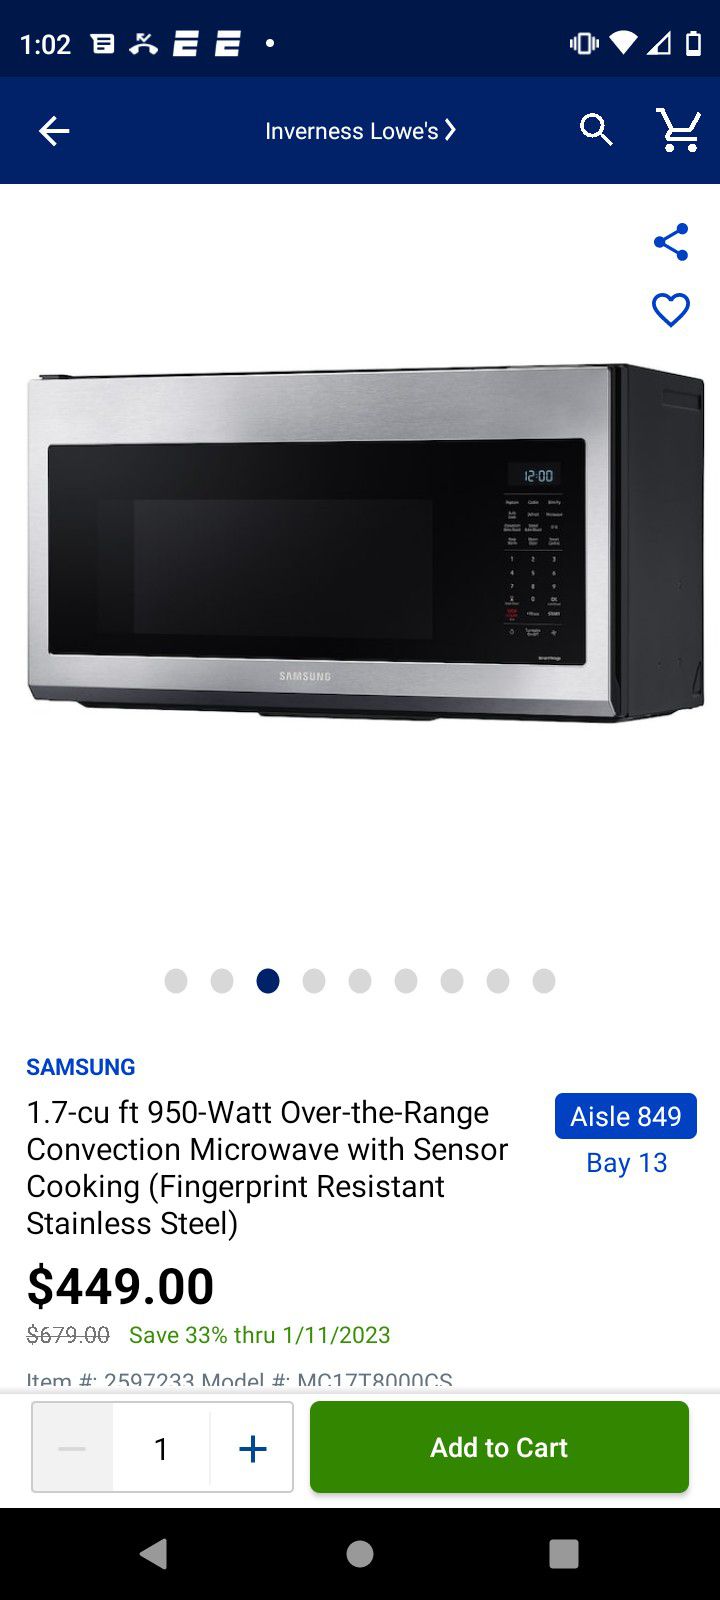 Brand New Samsung Underthehood Microwave 1.7 Normally Goes For 650 Selling Today $ 150 